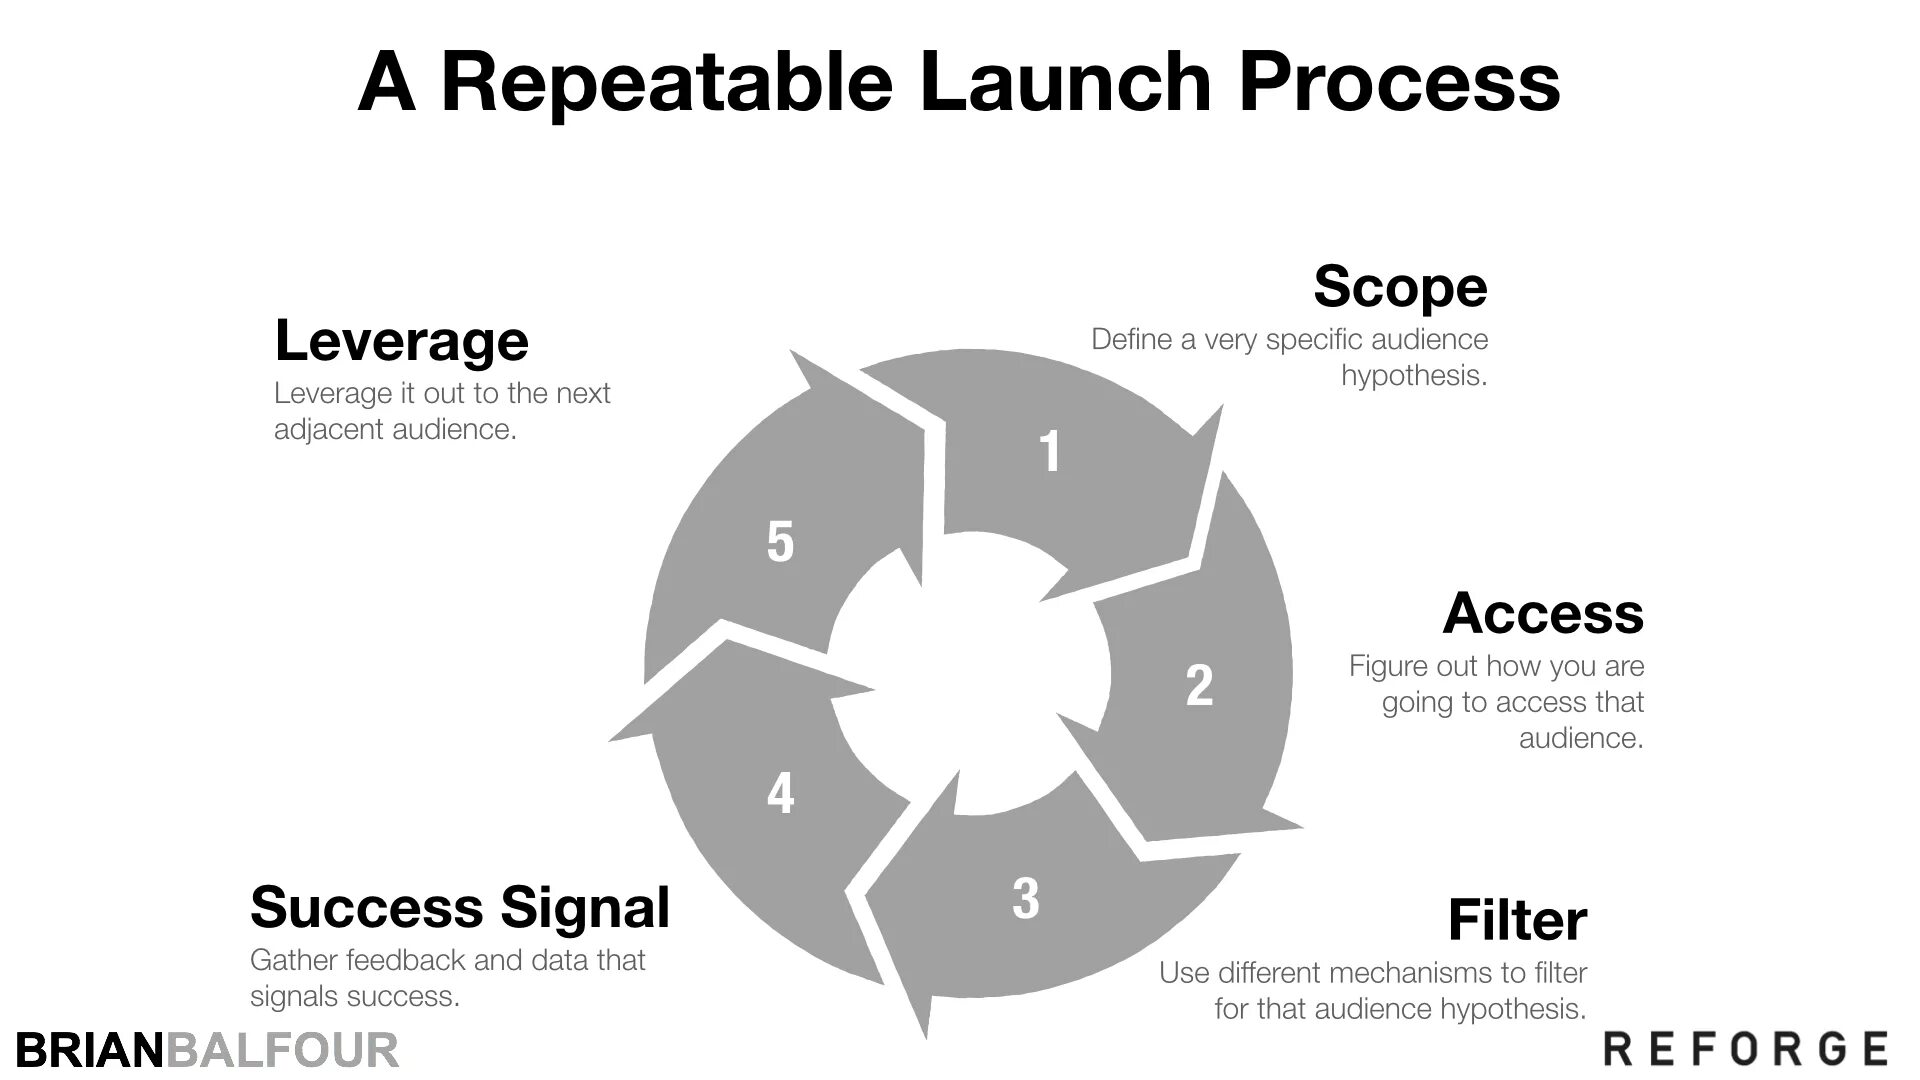 Product Launch. Products Launch process. New product Launch steps. Strategic 5 AMS. Process launcher c